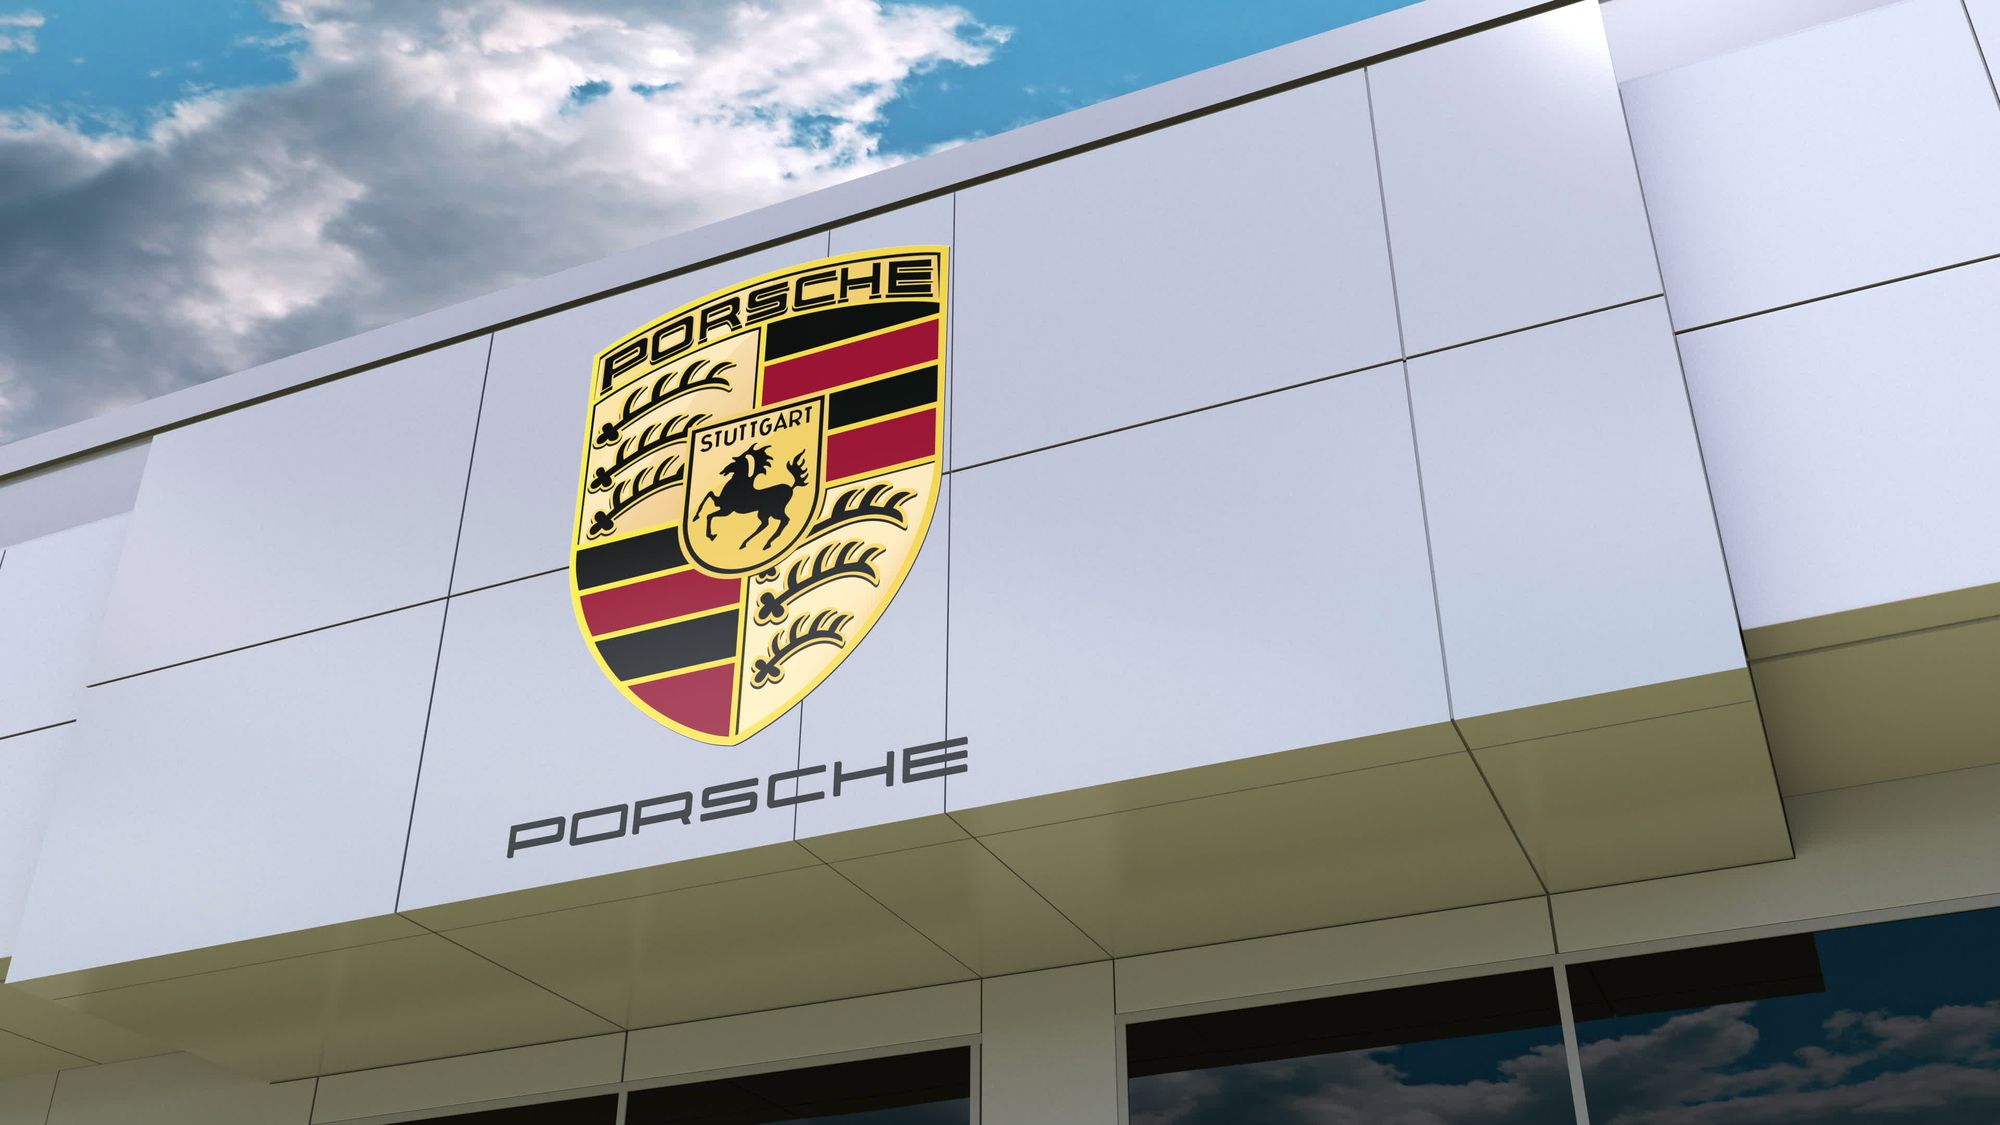 2021 Porsche sports cars recalled due to loose suspension components that can detach